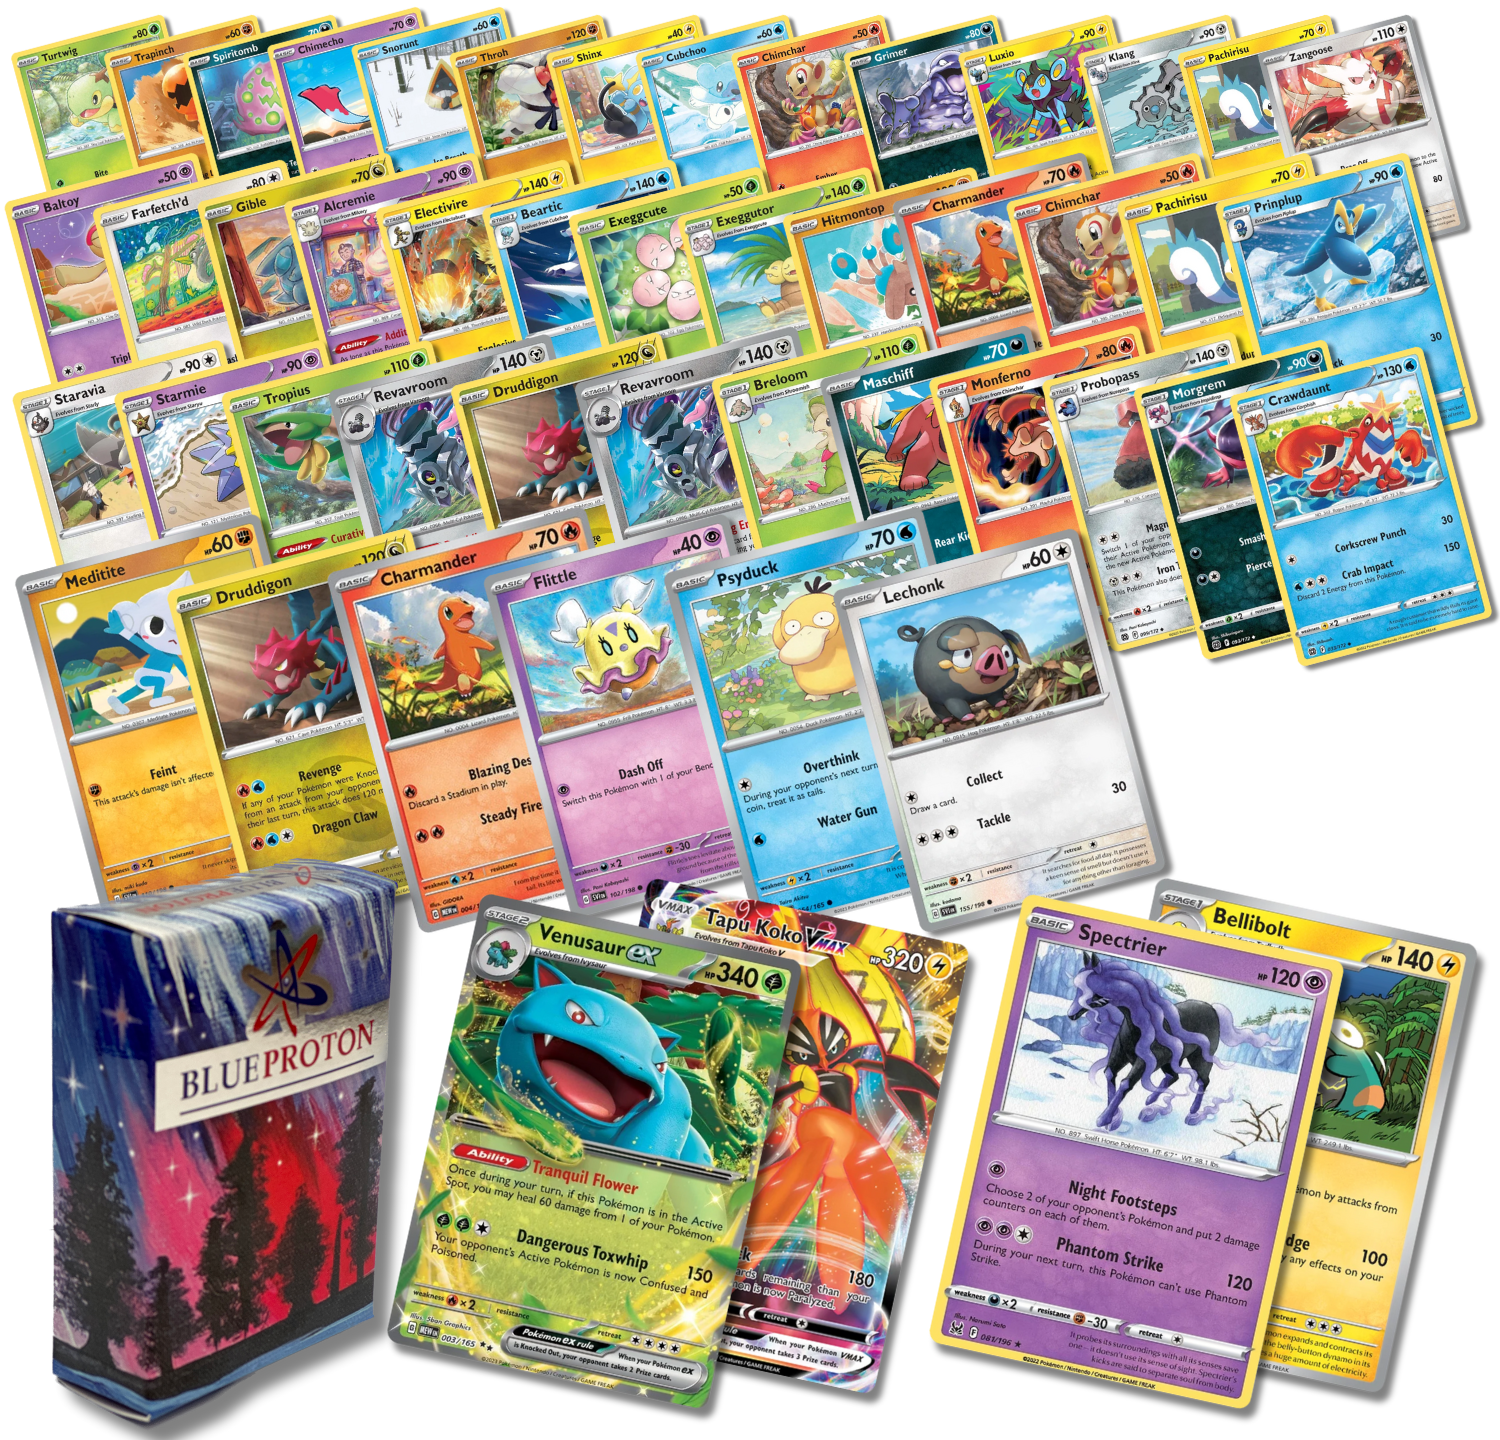 Exclusive Deluxe Bundle | 50 Genuine Cards | Includes 2 Guaranteed Ultra Rares: Legendary, VSTAR, VMAX, V, GX, or EX | Plus 2 Holos or Rares | BlueProton Deck Box compatible with trading cards